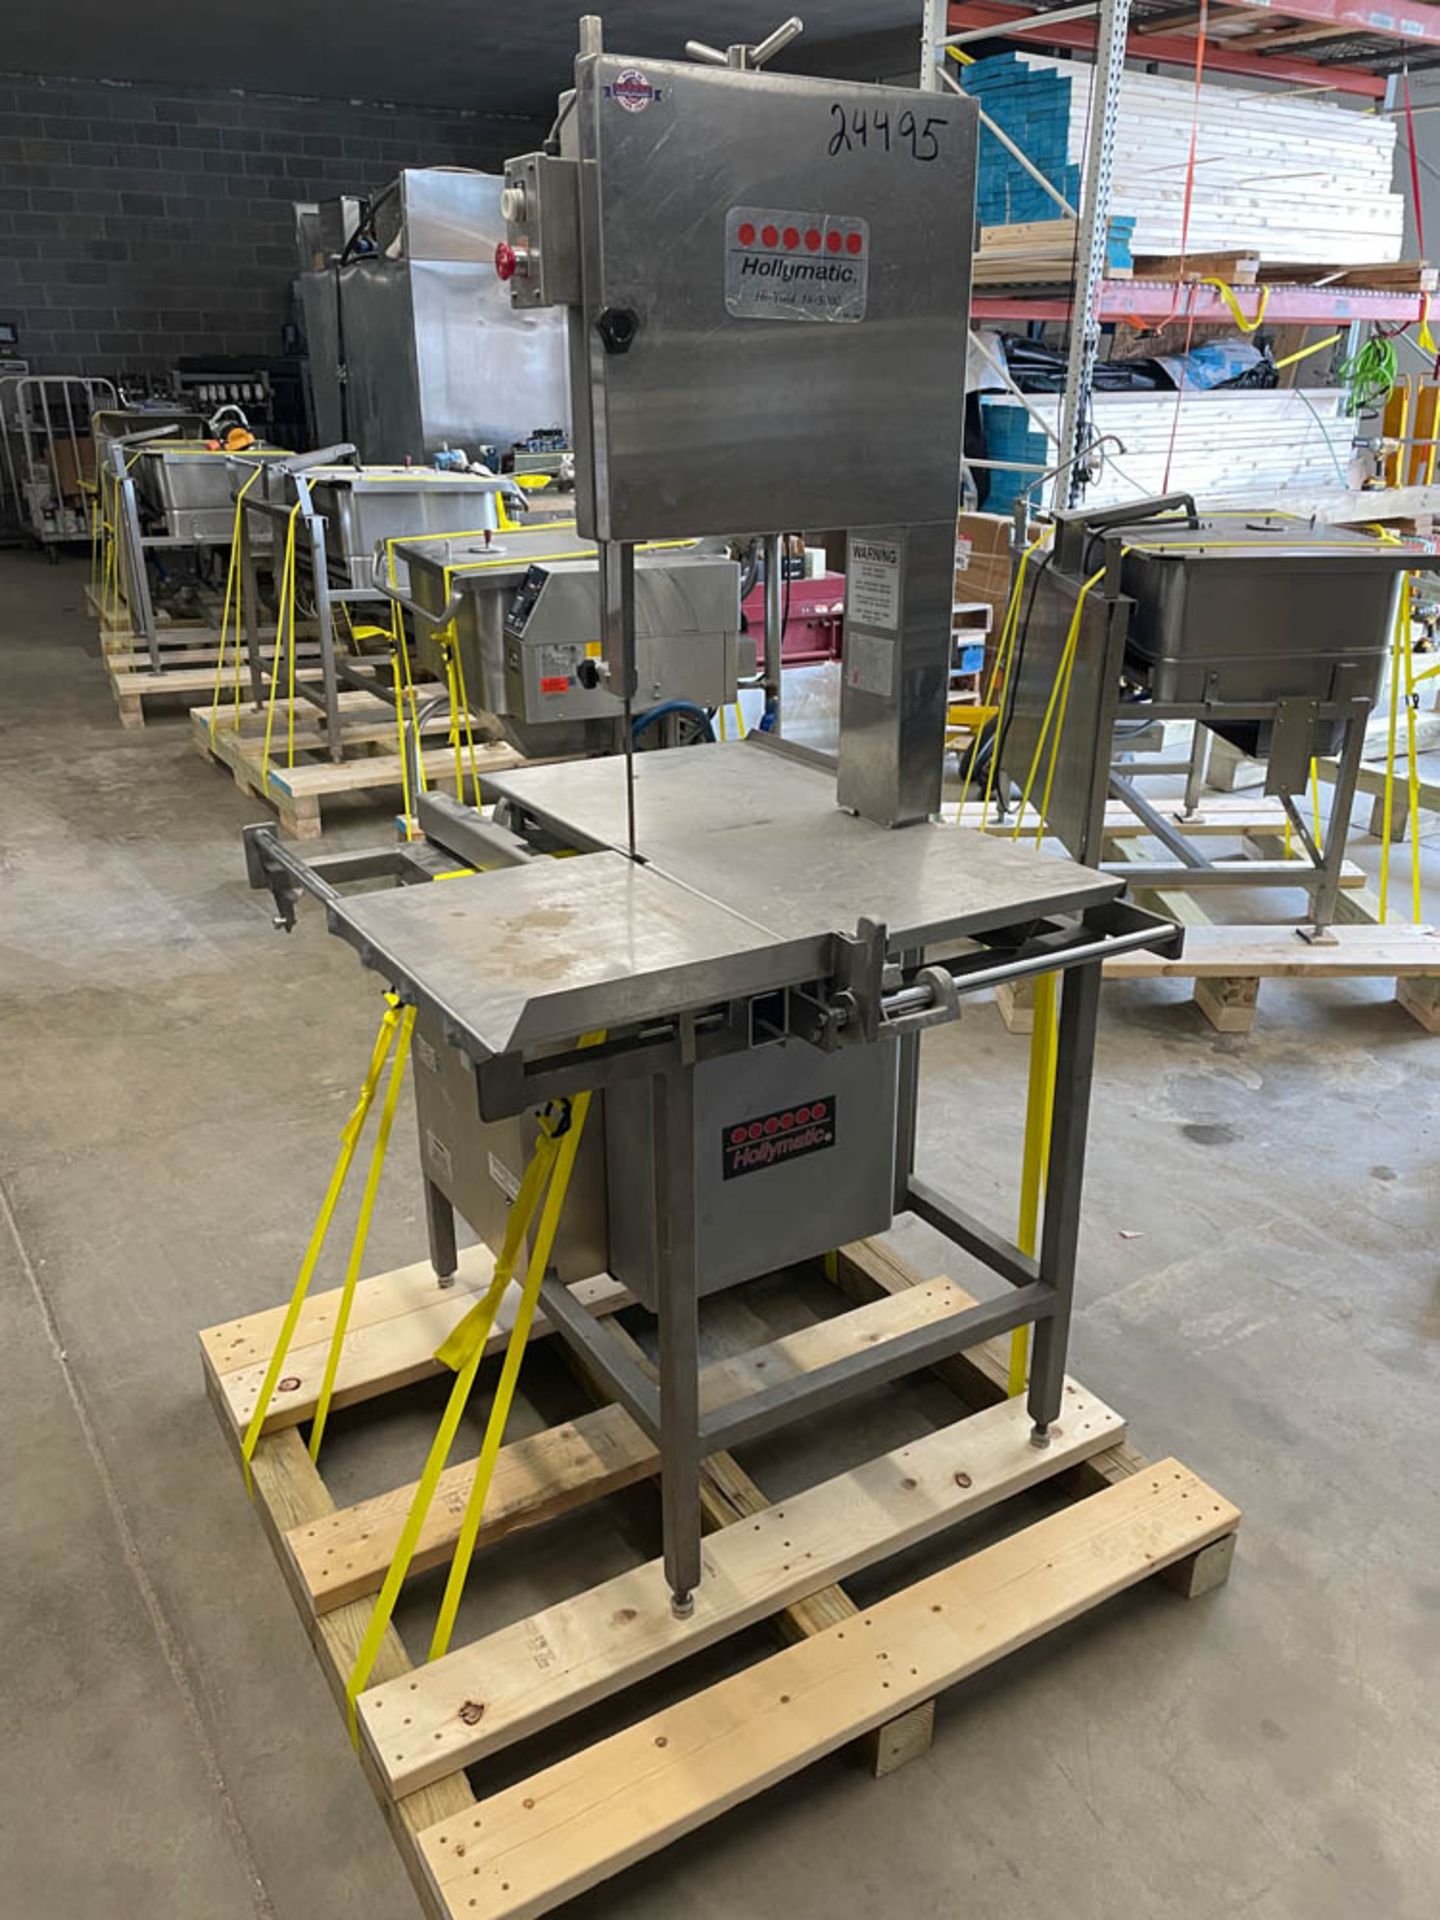 Hollymatic Hi-Yield 16-5000 Vertical Meat Saw, SN: 5672, 8.8 Amp, 3 HP, 200-240 V, 60 Hz. 11 2022 - Image 4 of 7